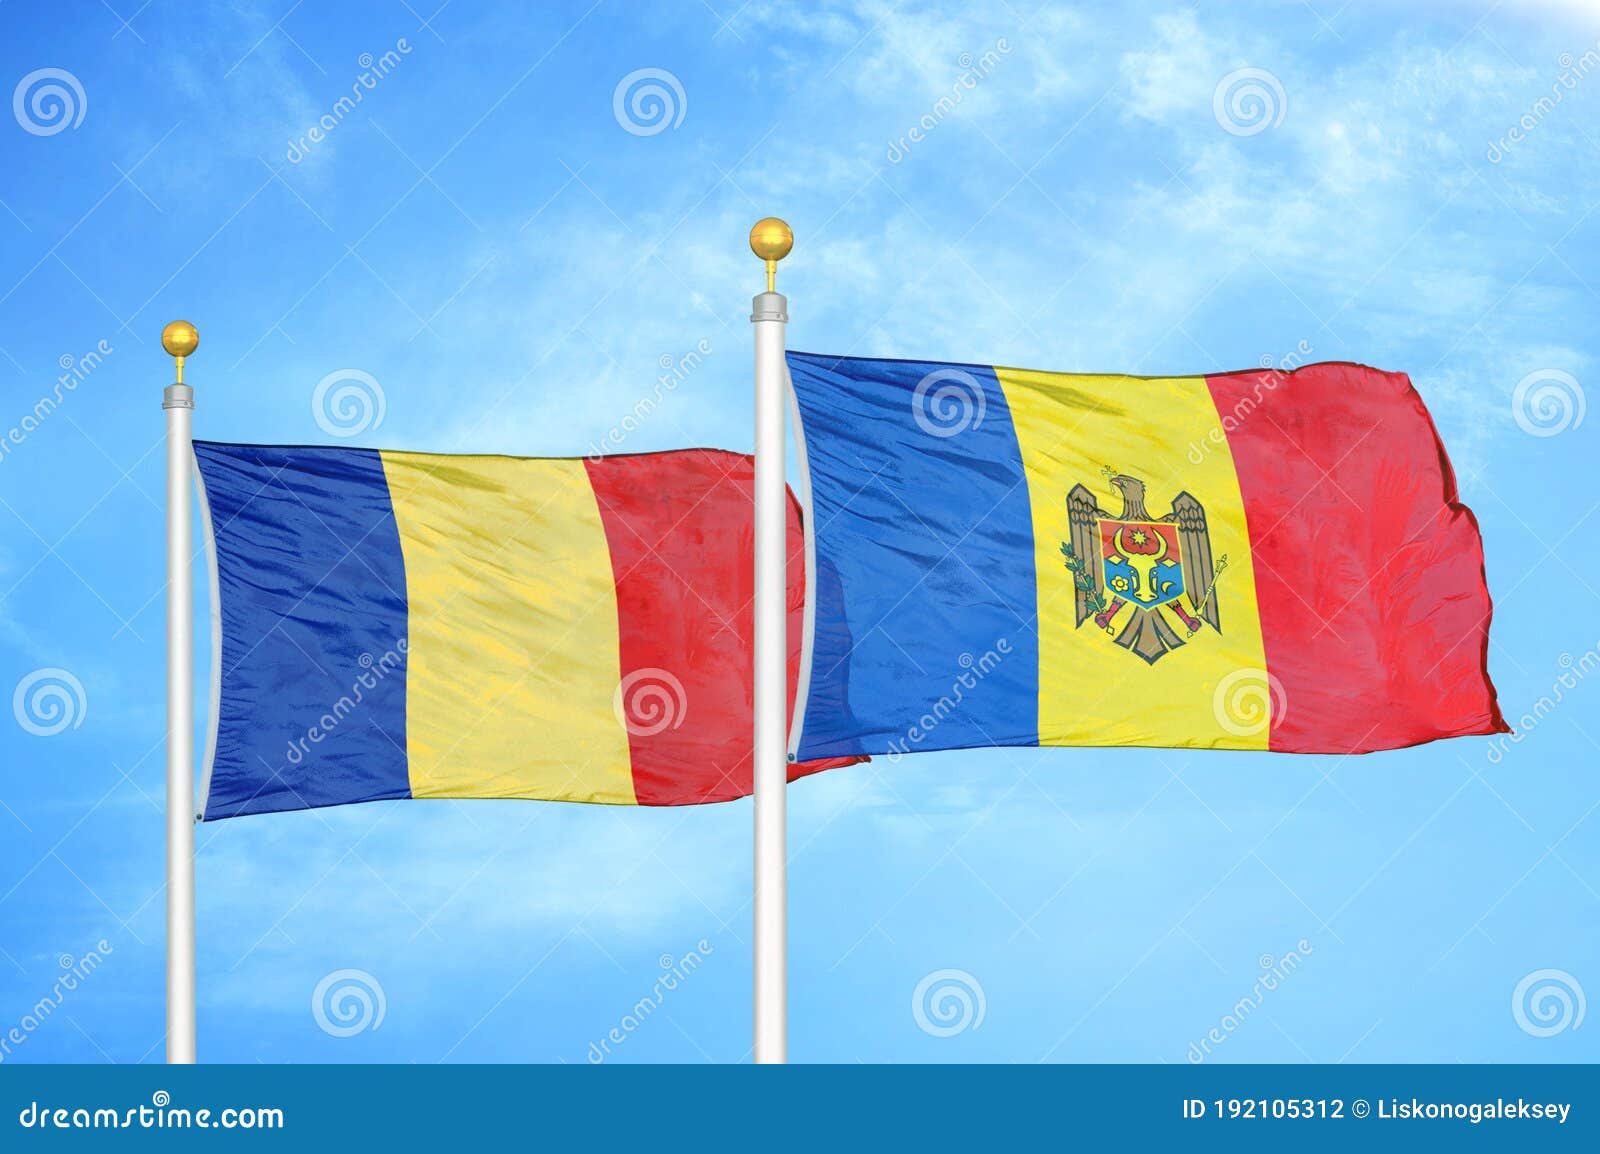 romania and moldova two flags on flagpoles and blue sky